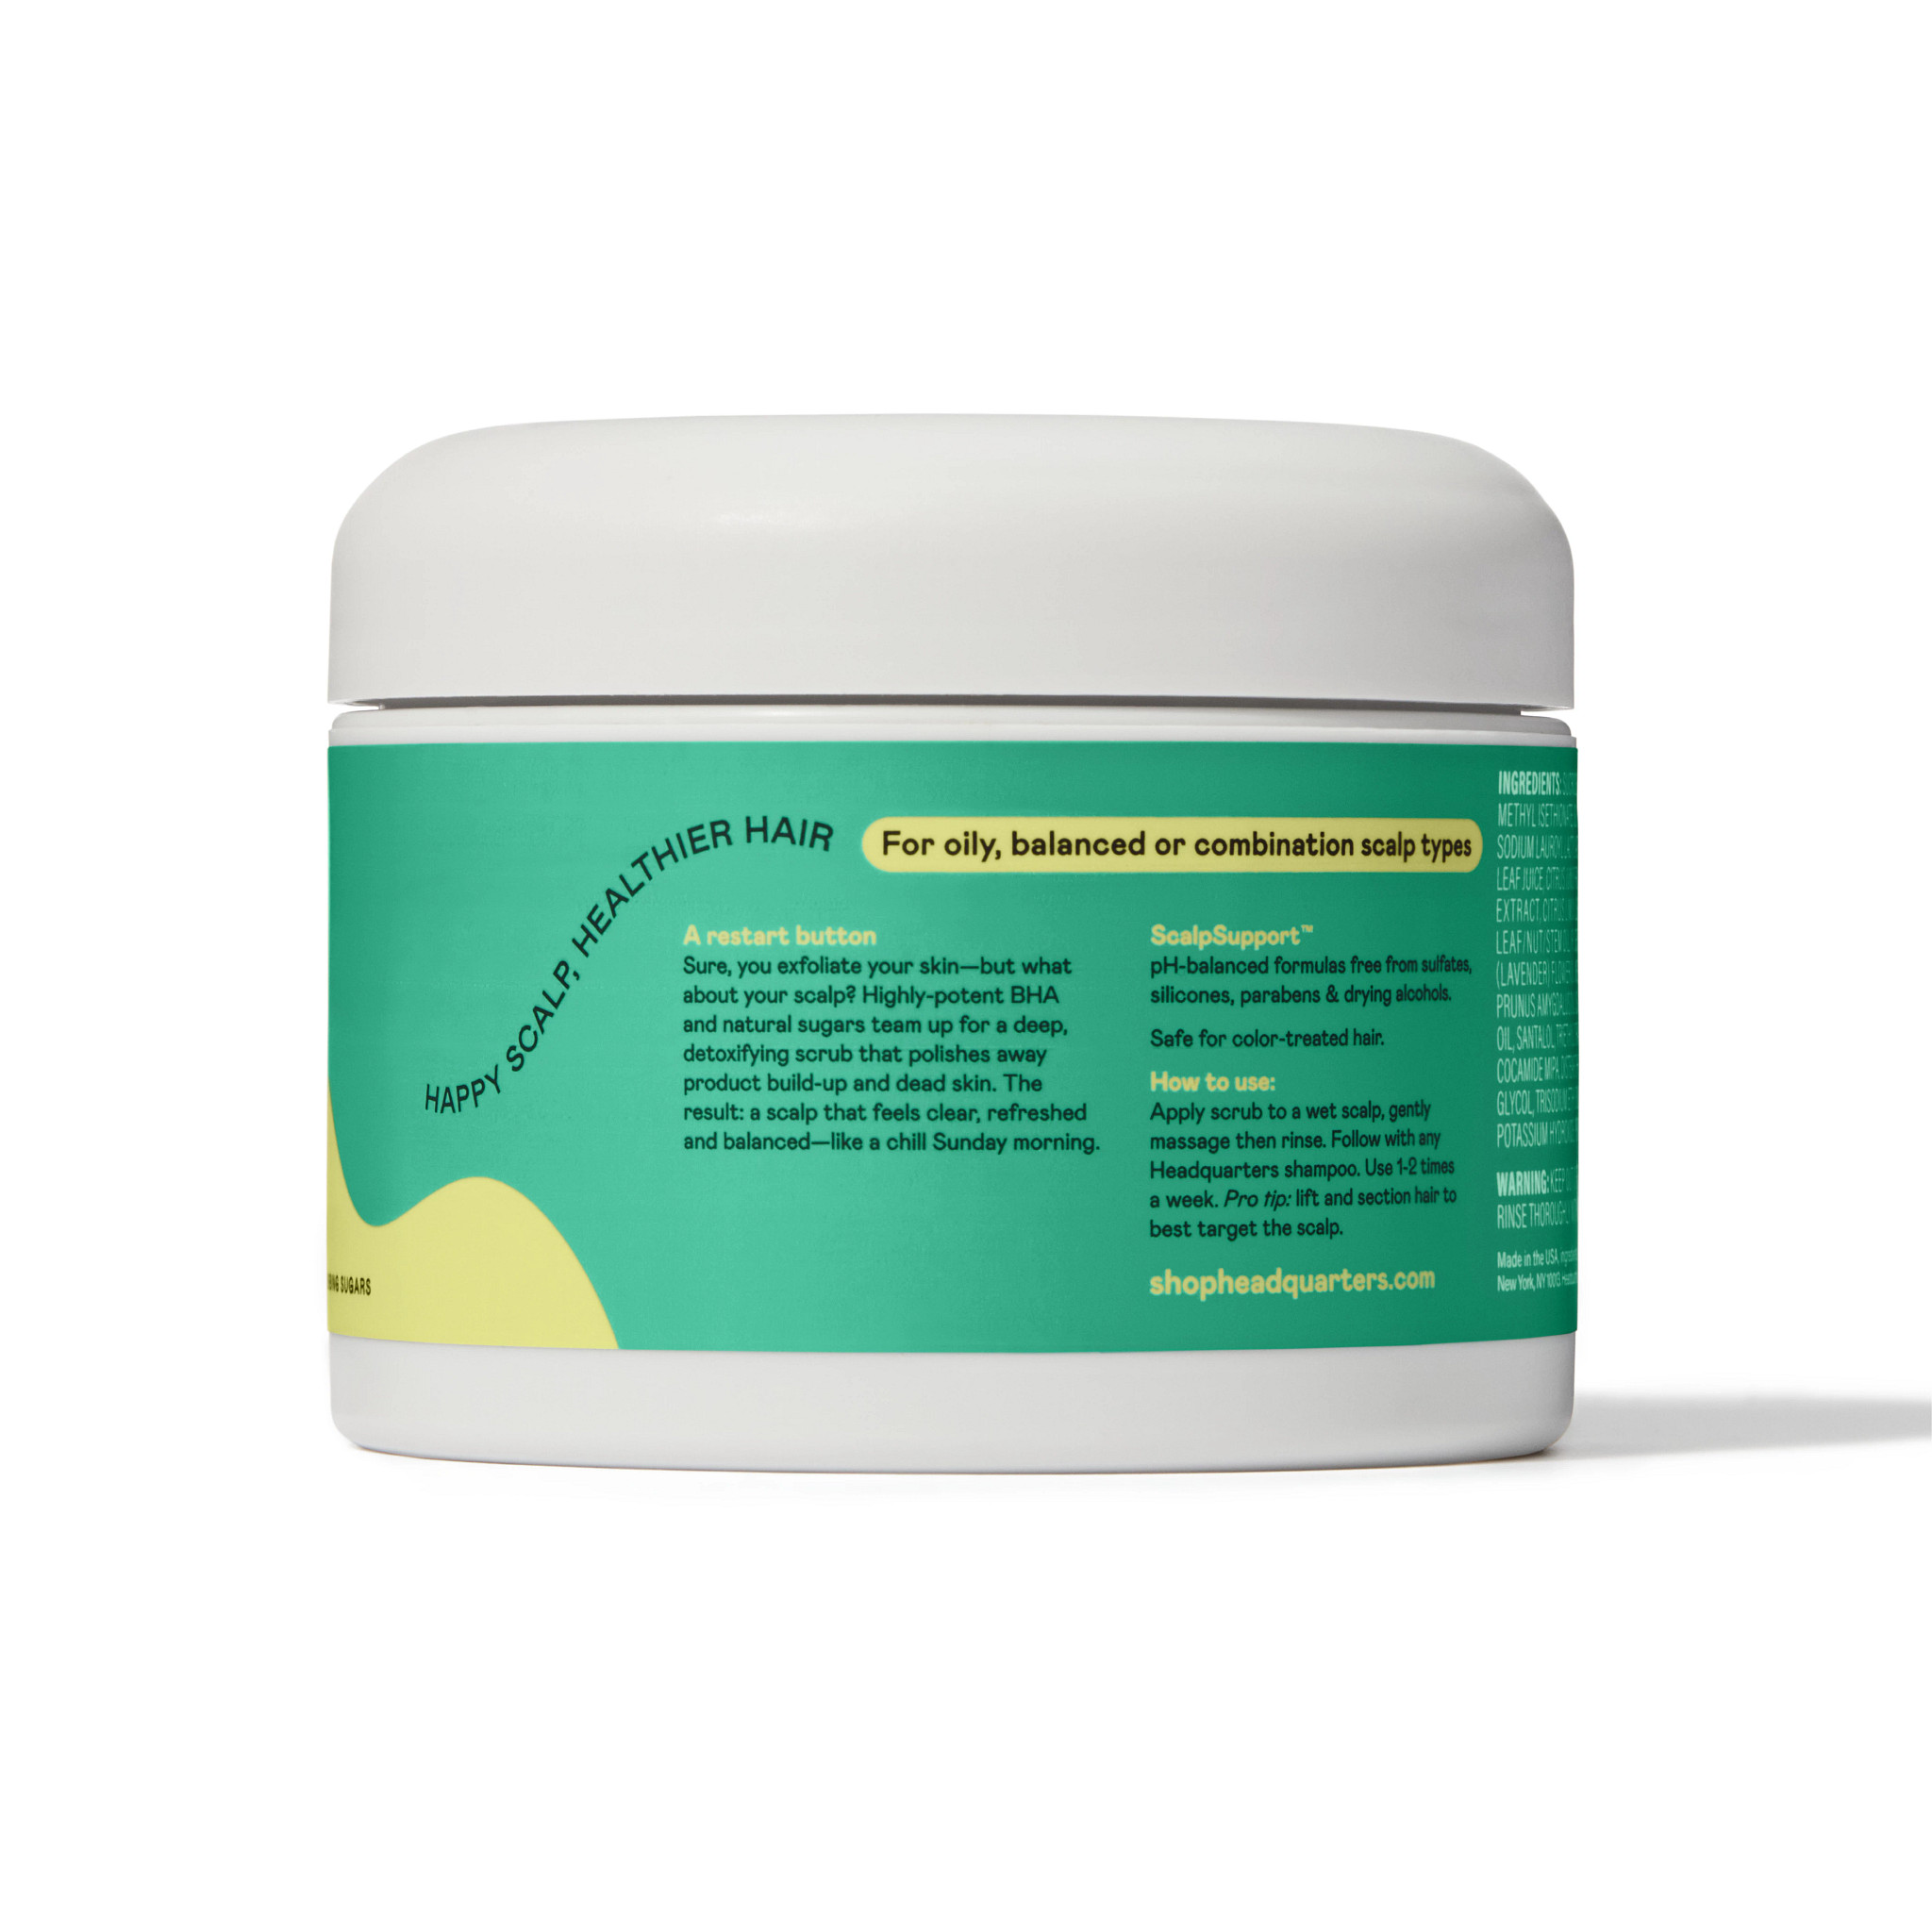 Headquarters Deep Scalp Exfoliating Scrub for Oily Scalp and Hair, Net wt 8 oz / 226.8 g - image 3 of 12